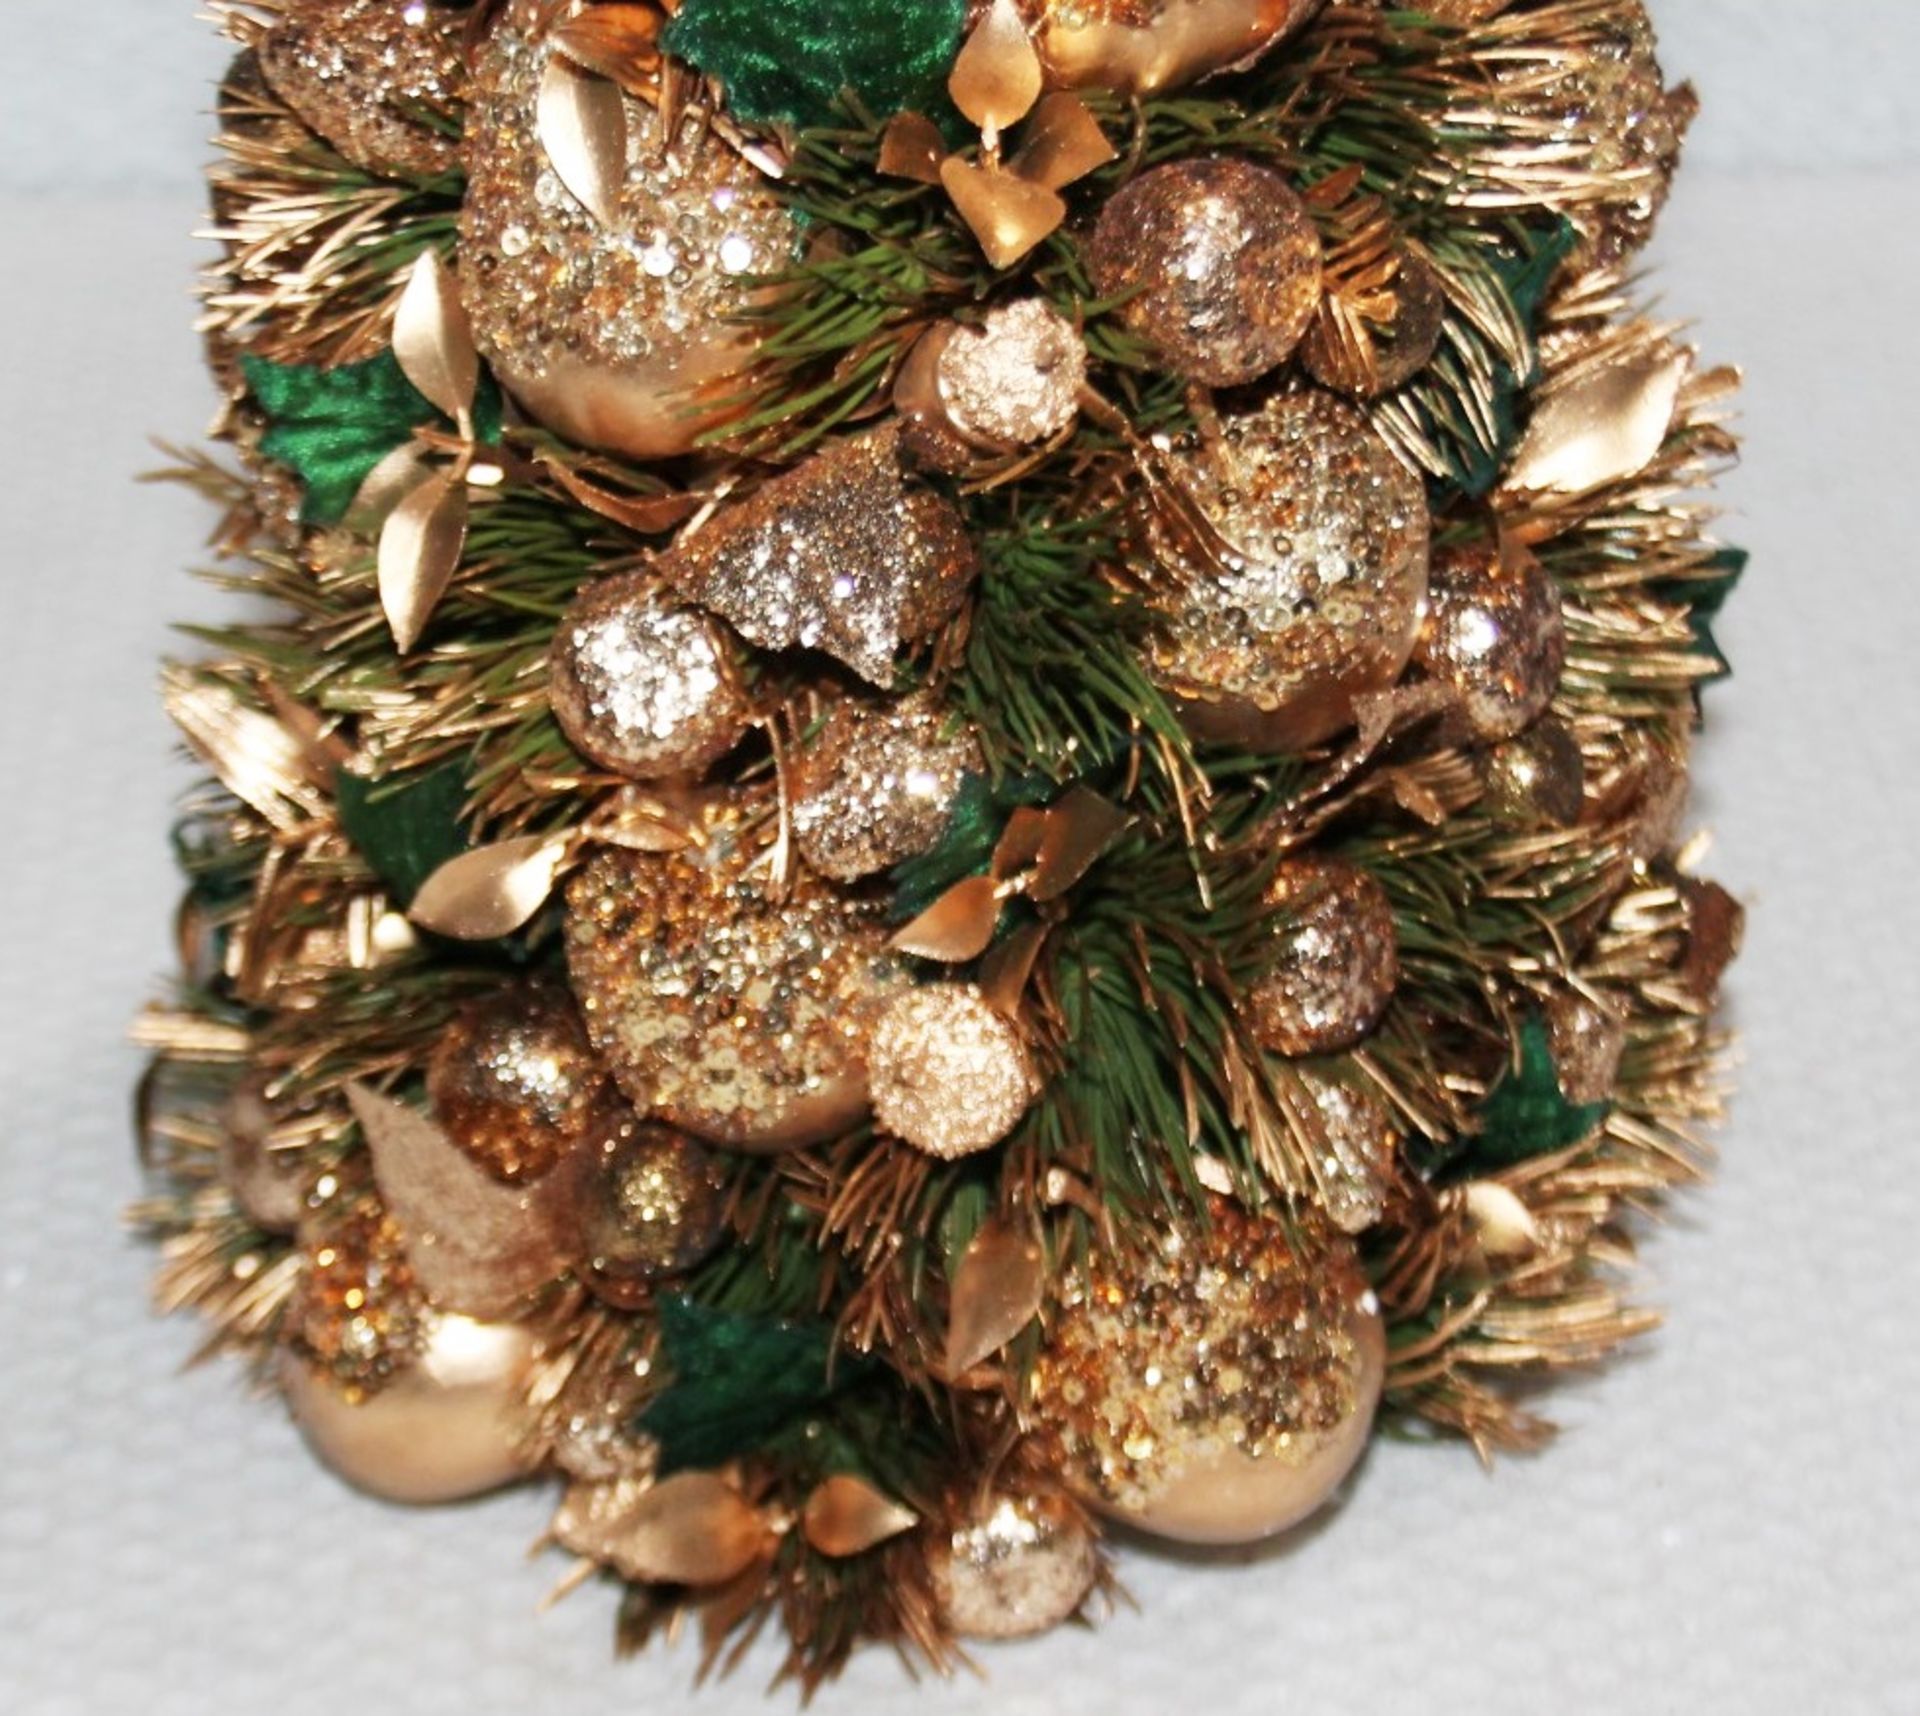 1 x SALZBURG CREATIONS Decorative 'Pear Tree' Ornament In Gold & Green - 18 Inches Tall - Original - Image 5 of 7